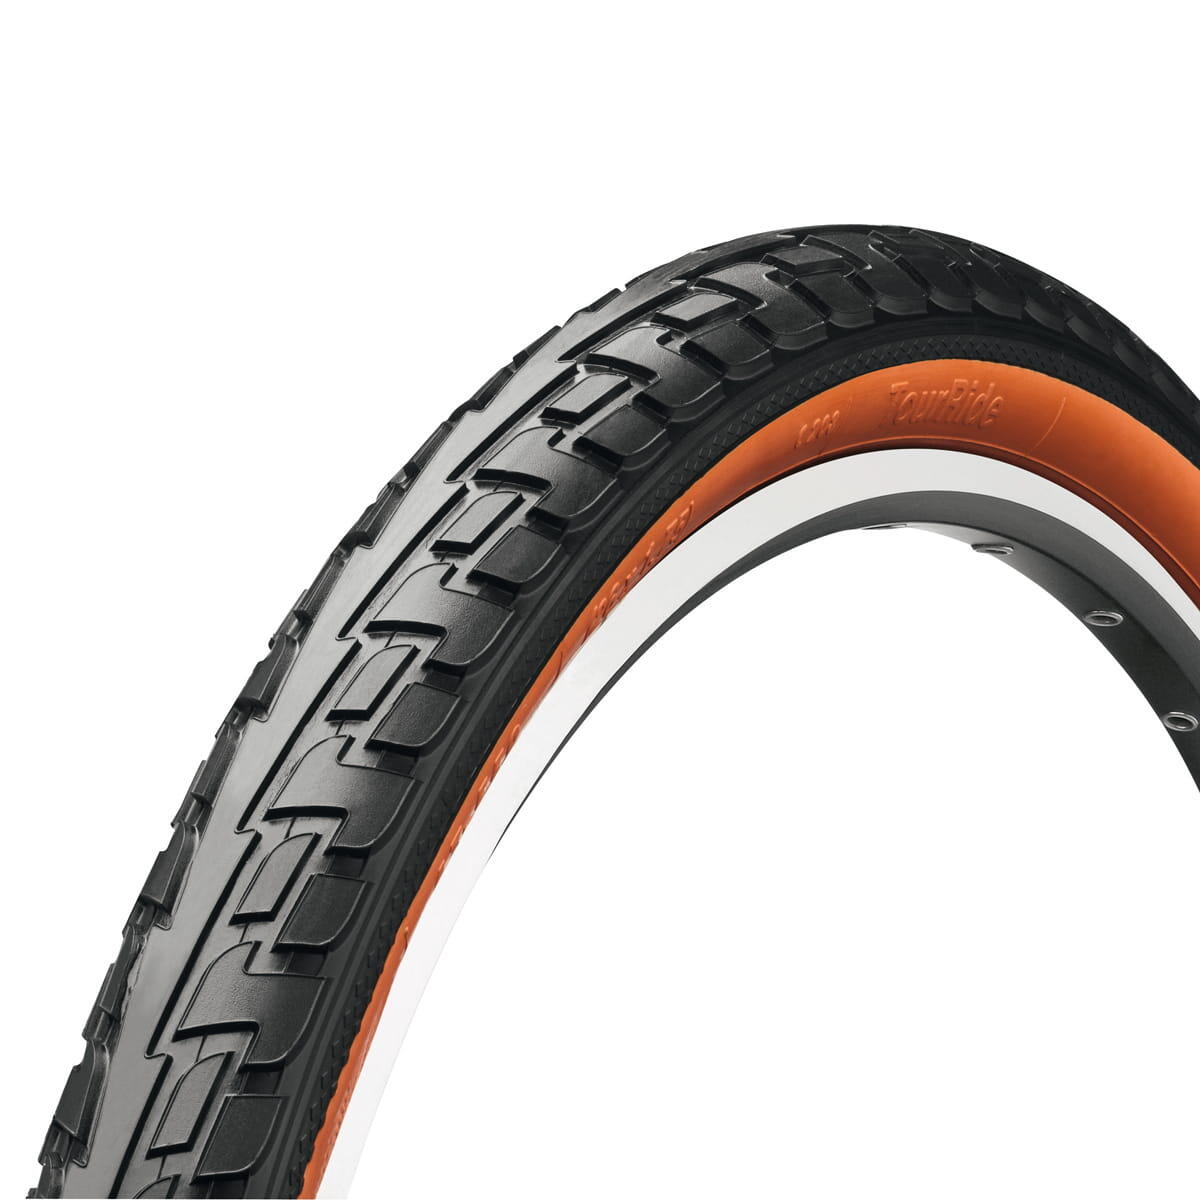 RIDE Tour Tyre-Wire Bead Urban Black/Black 700 X 32C Puncture Protection 4/5